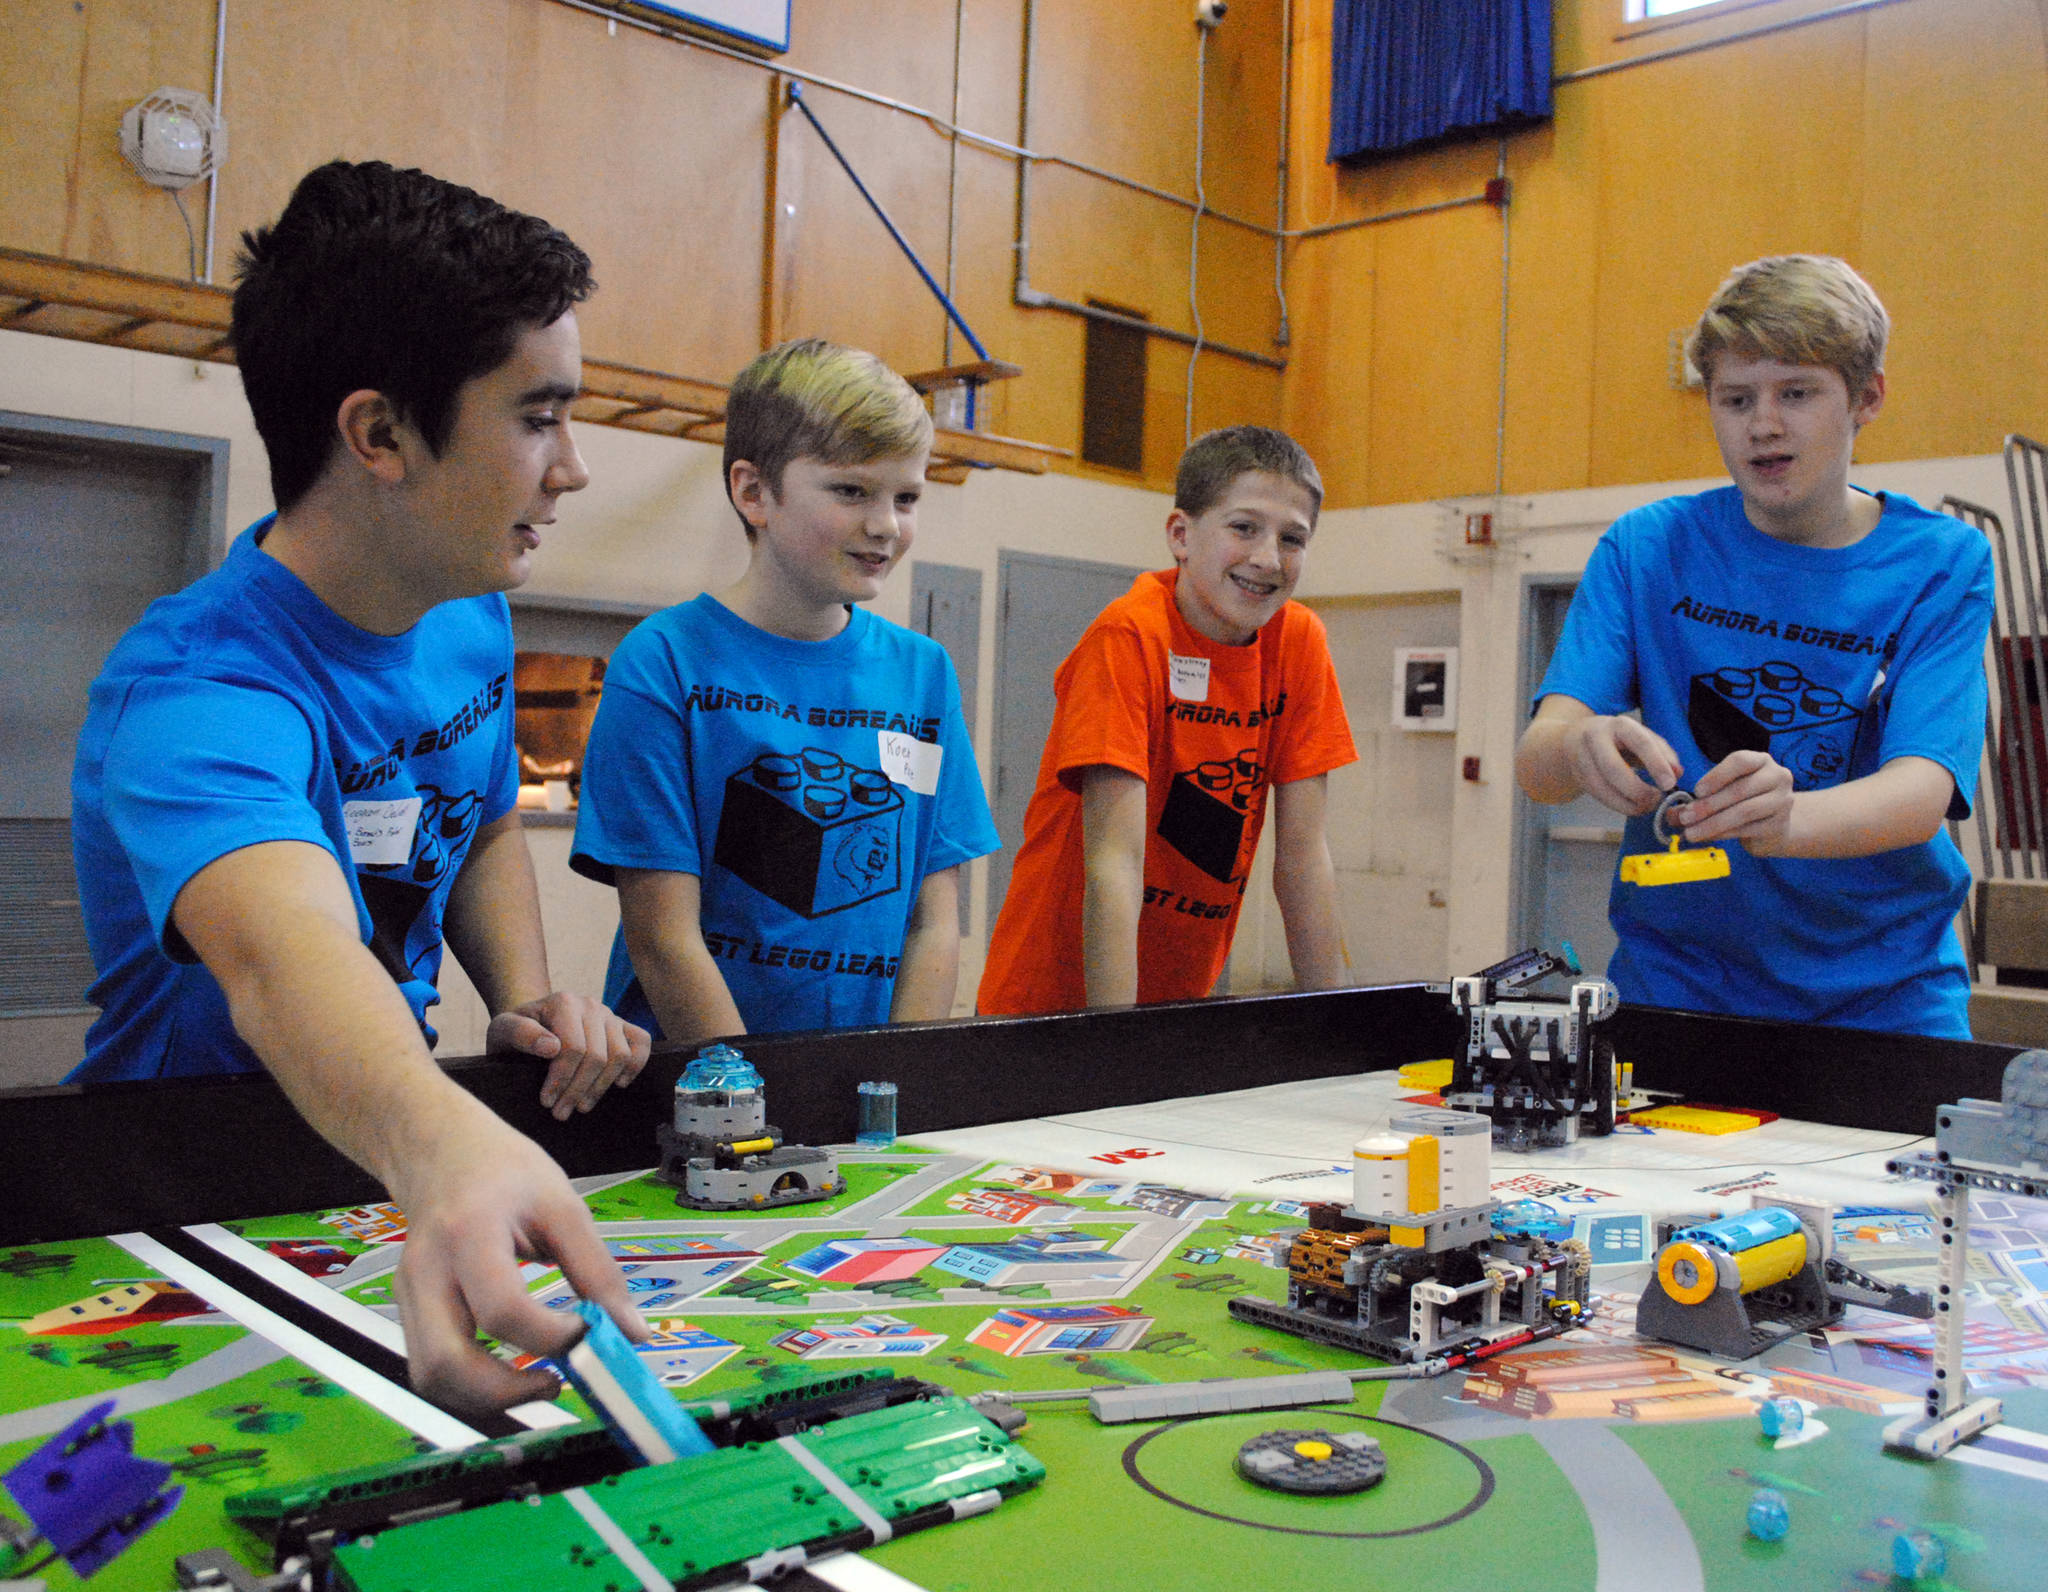 Team members from the Aurora Borealis ‘Polar Bears’ practice their robots programming during Saturday’s First Lego League at Aurora Borealis Charter School. The competition challenges students to solve an issue with legos, teamwork and some engineering. The team went home with the Champion’s Award and will continue on to the state competition in Anchorage. (Photo by Kat Sorensen/Peninsula Clarion)